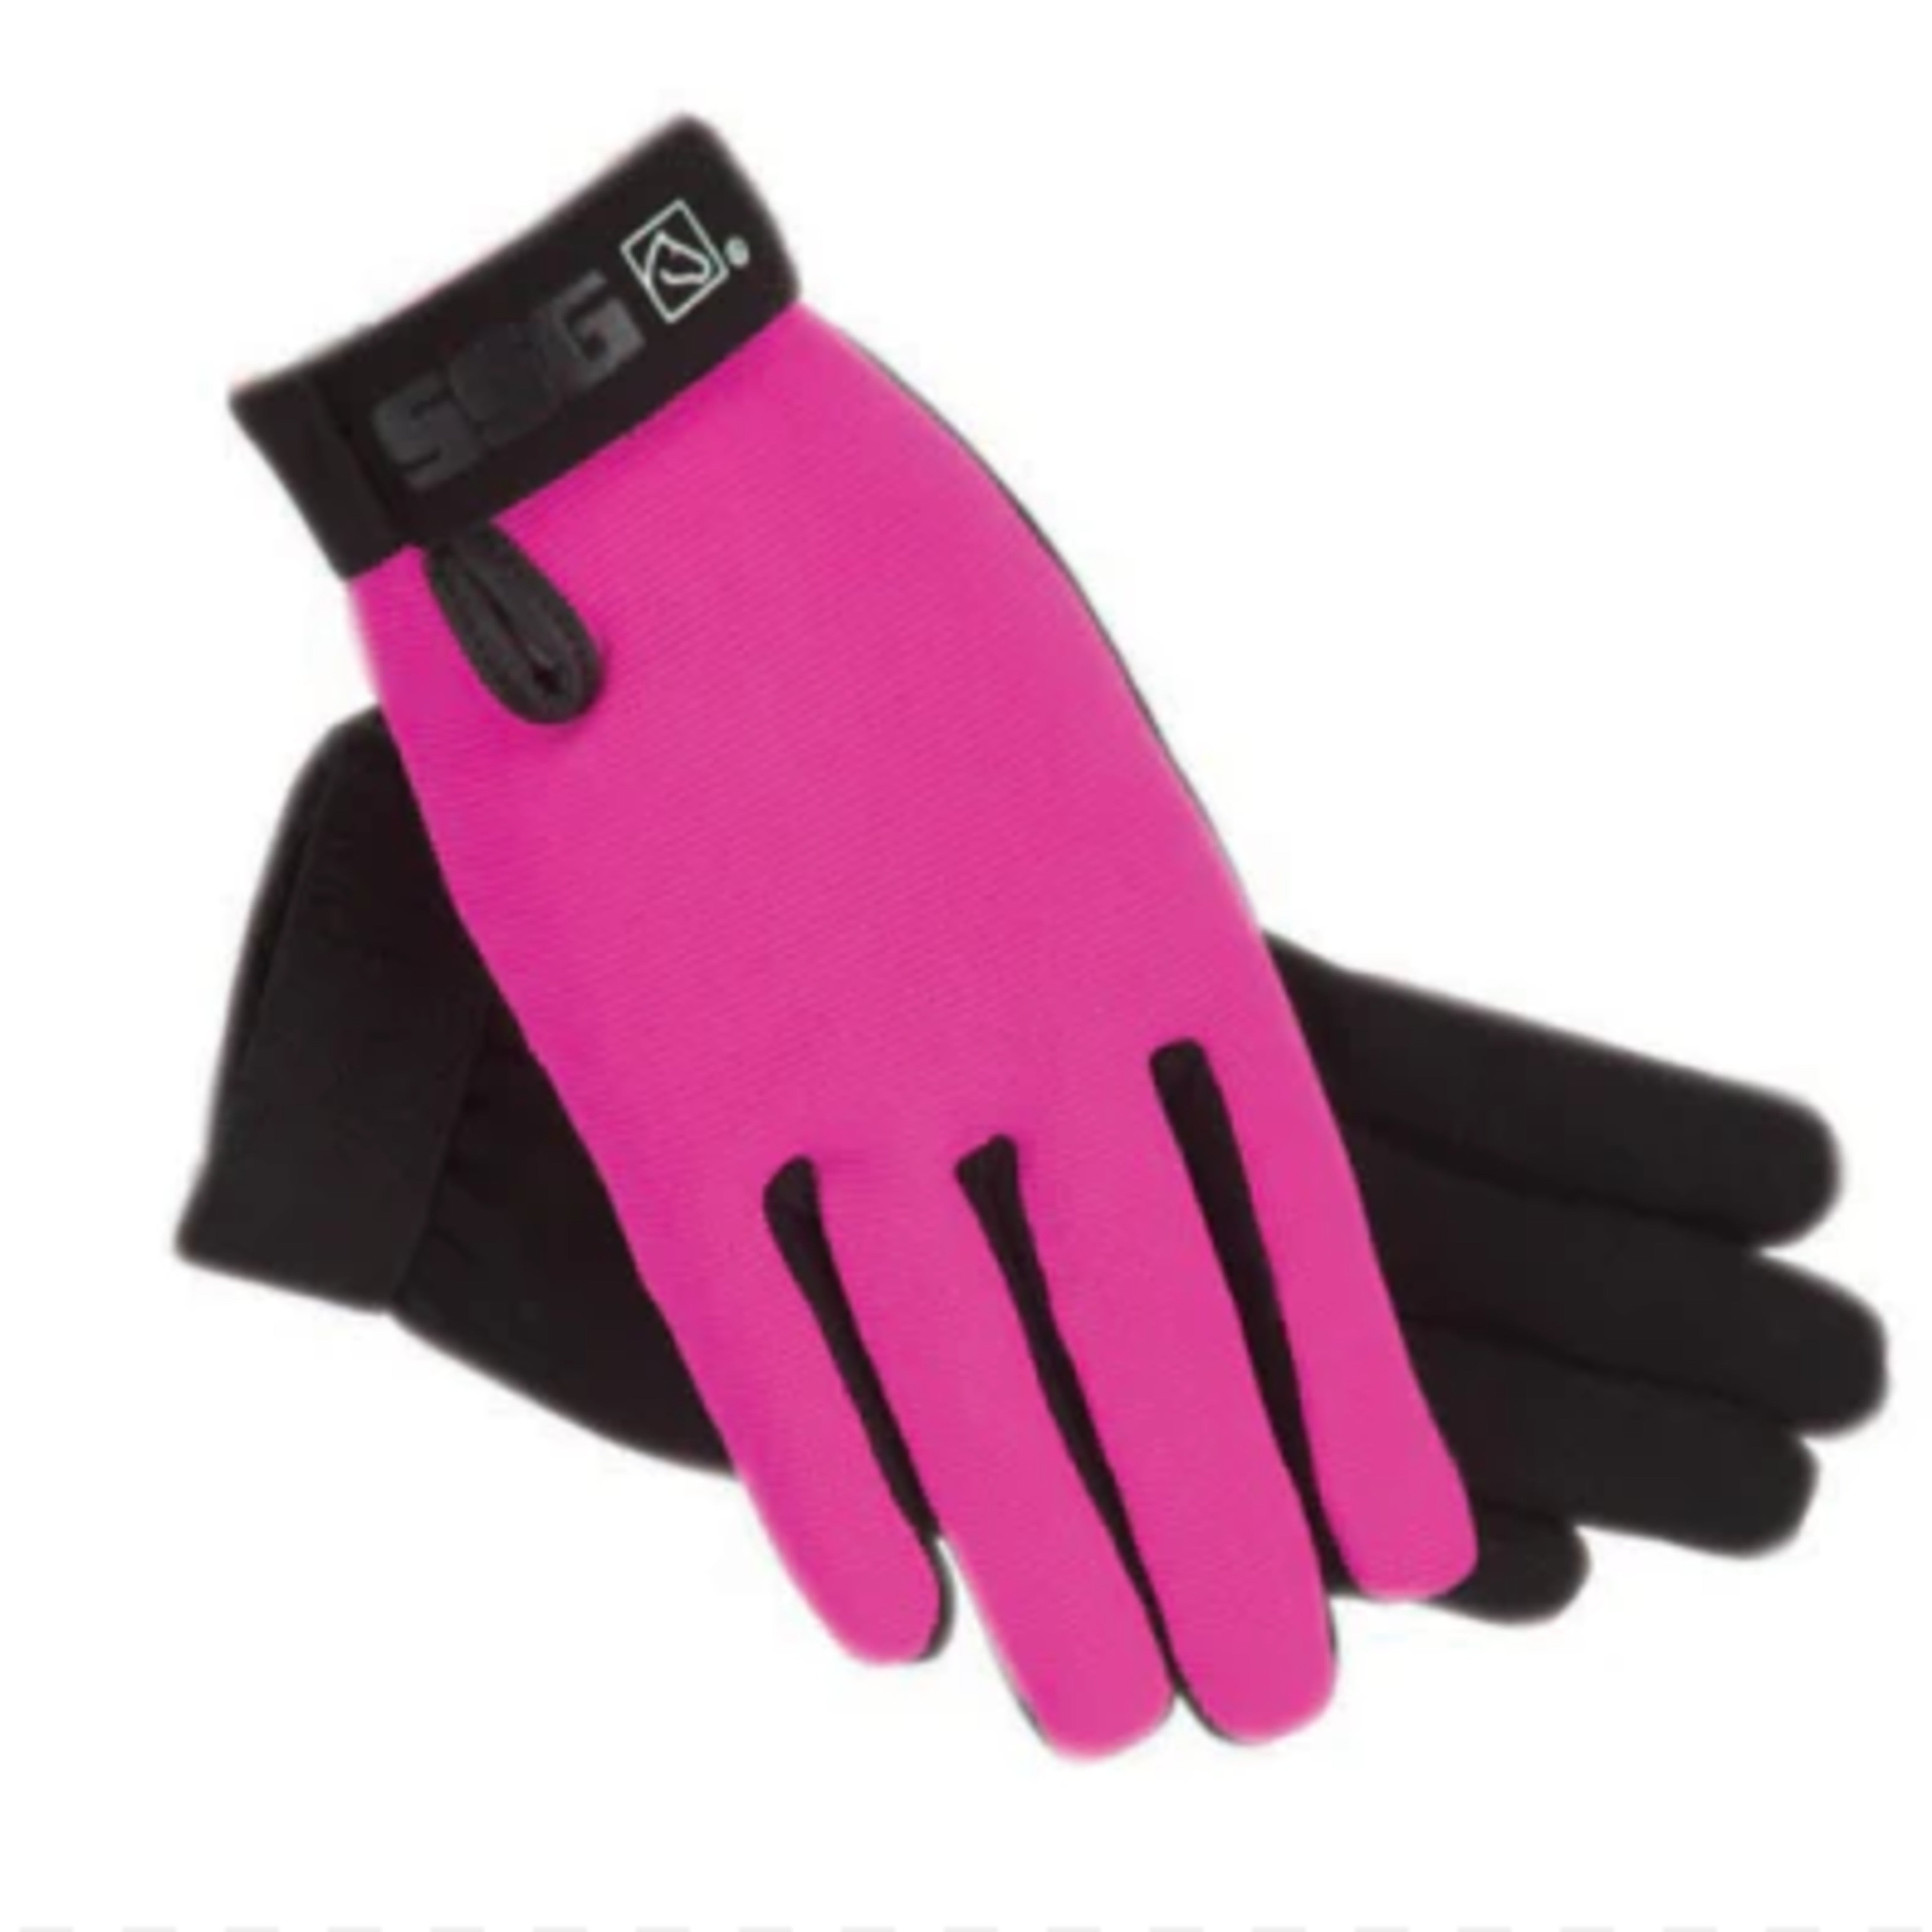 SSG Gloves 8600 All-Weather